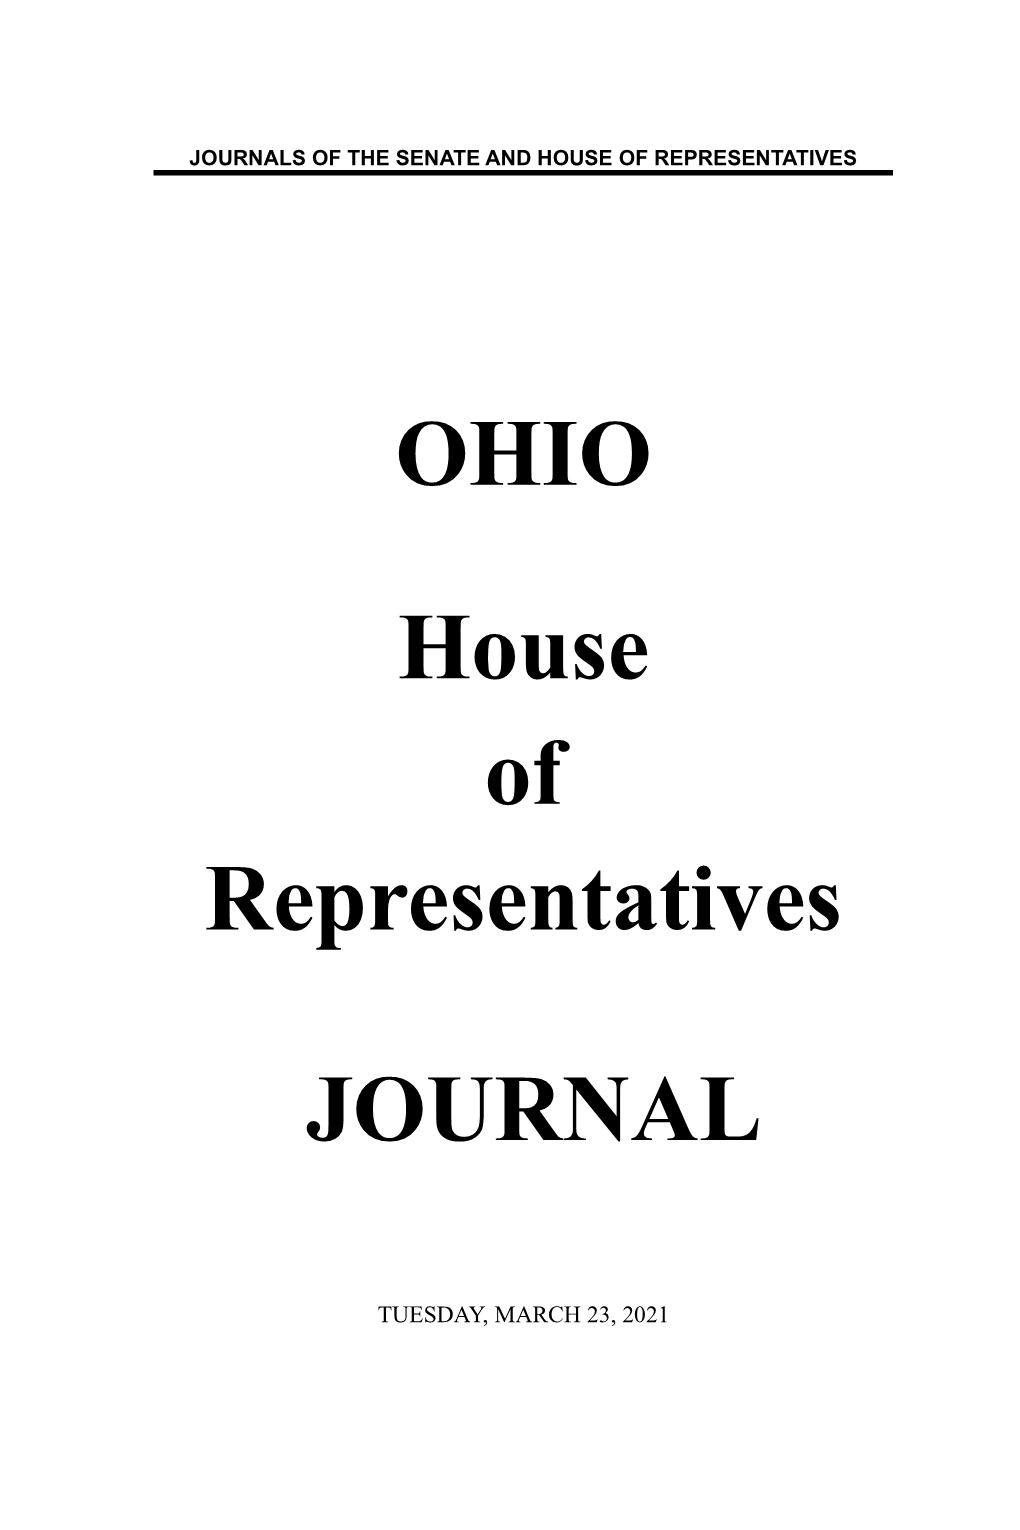 March 23, 2021 376 House Journal, Tuesday, March 23, 2021